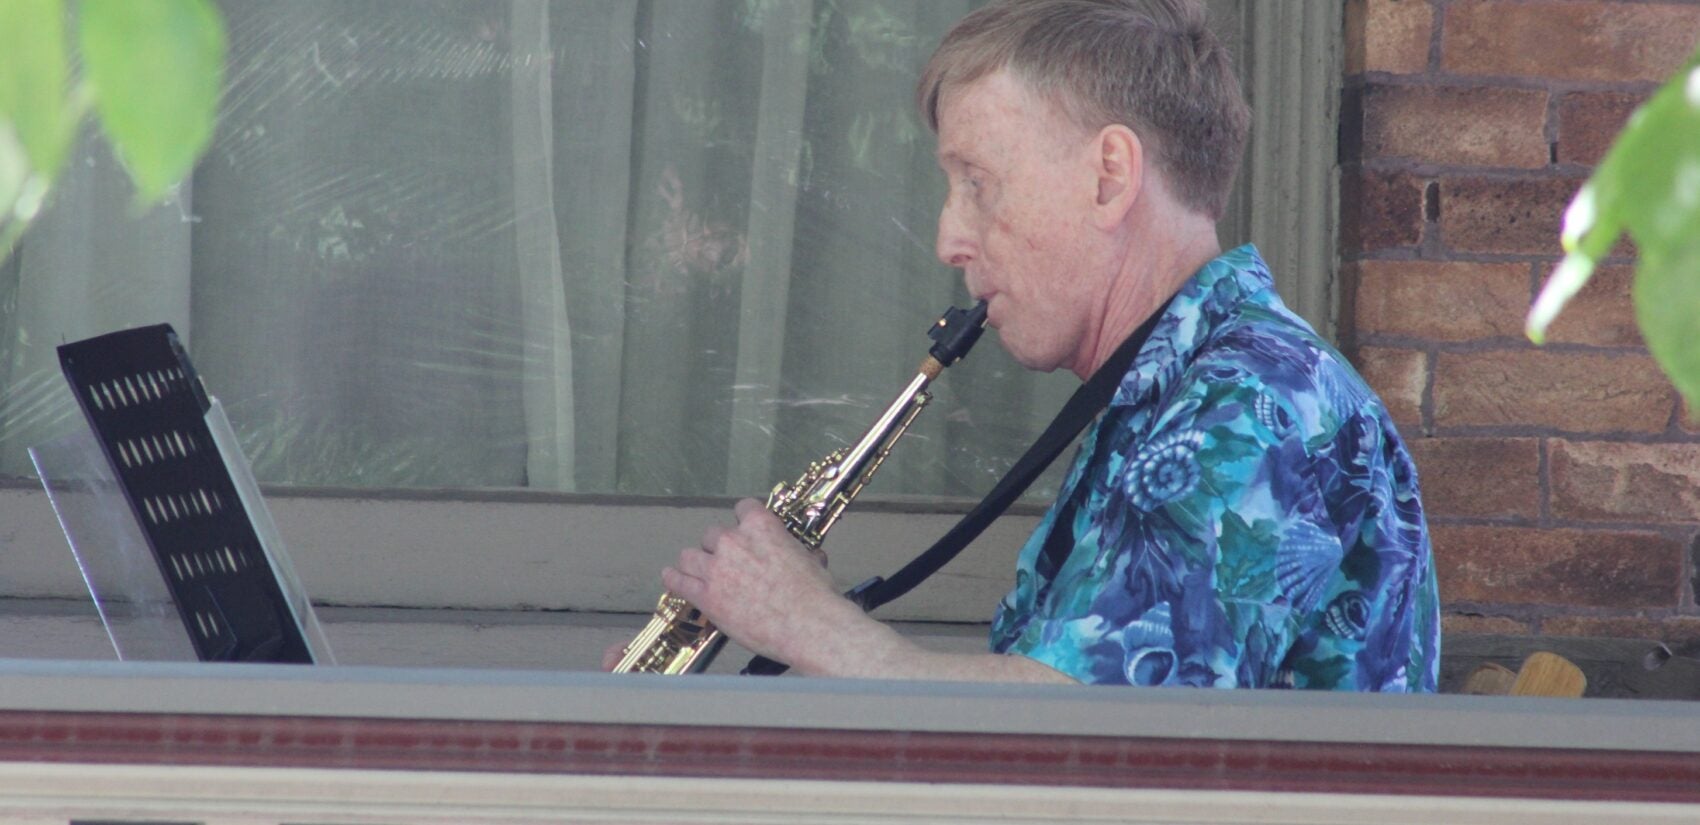 a person plays a wind instrument